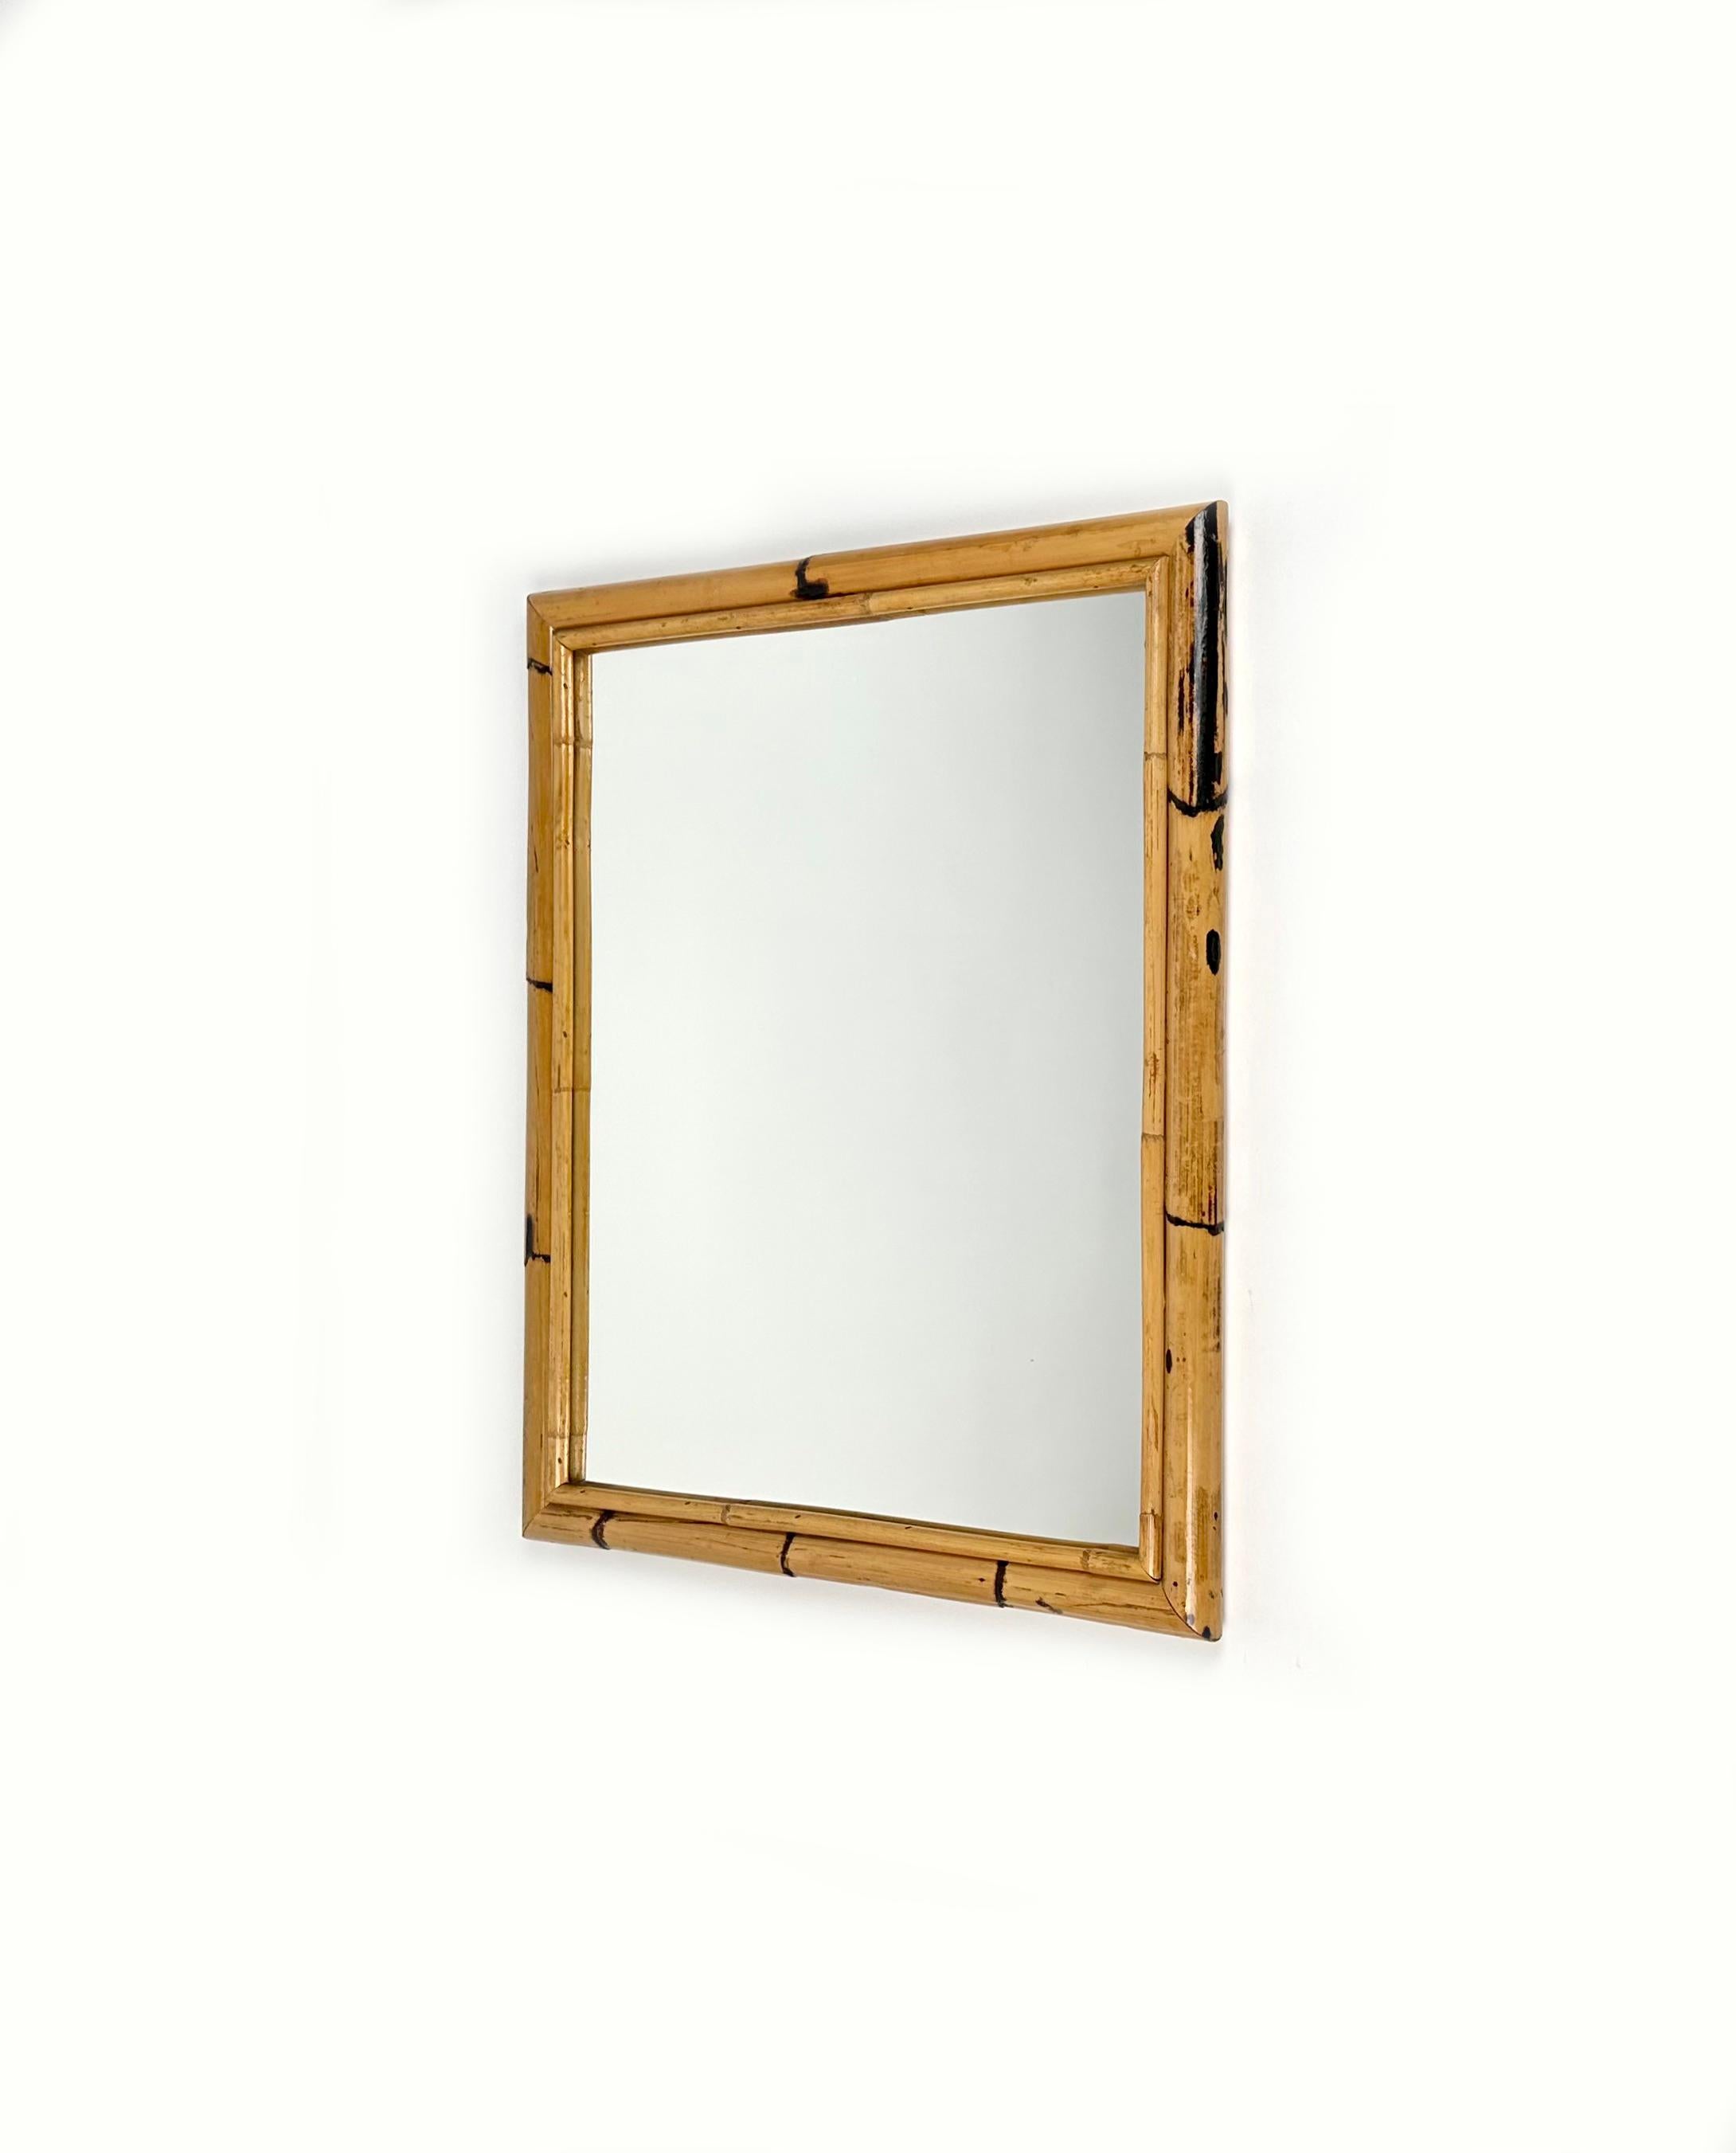 Late 20th Century Midcentury Rectangular Wall Mirror Double Bamboo Frame, Italy 1970s For Sale